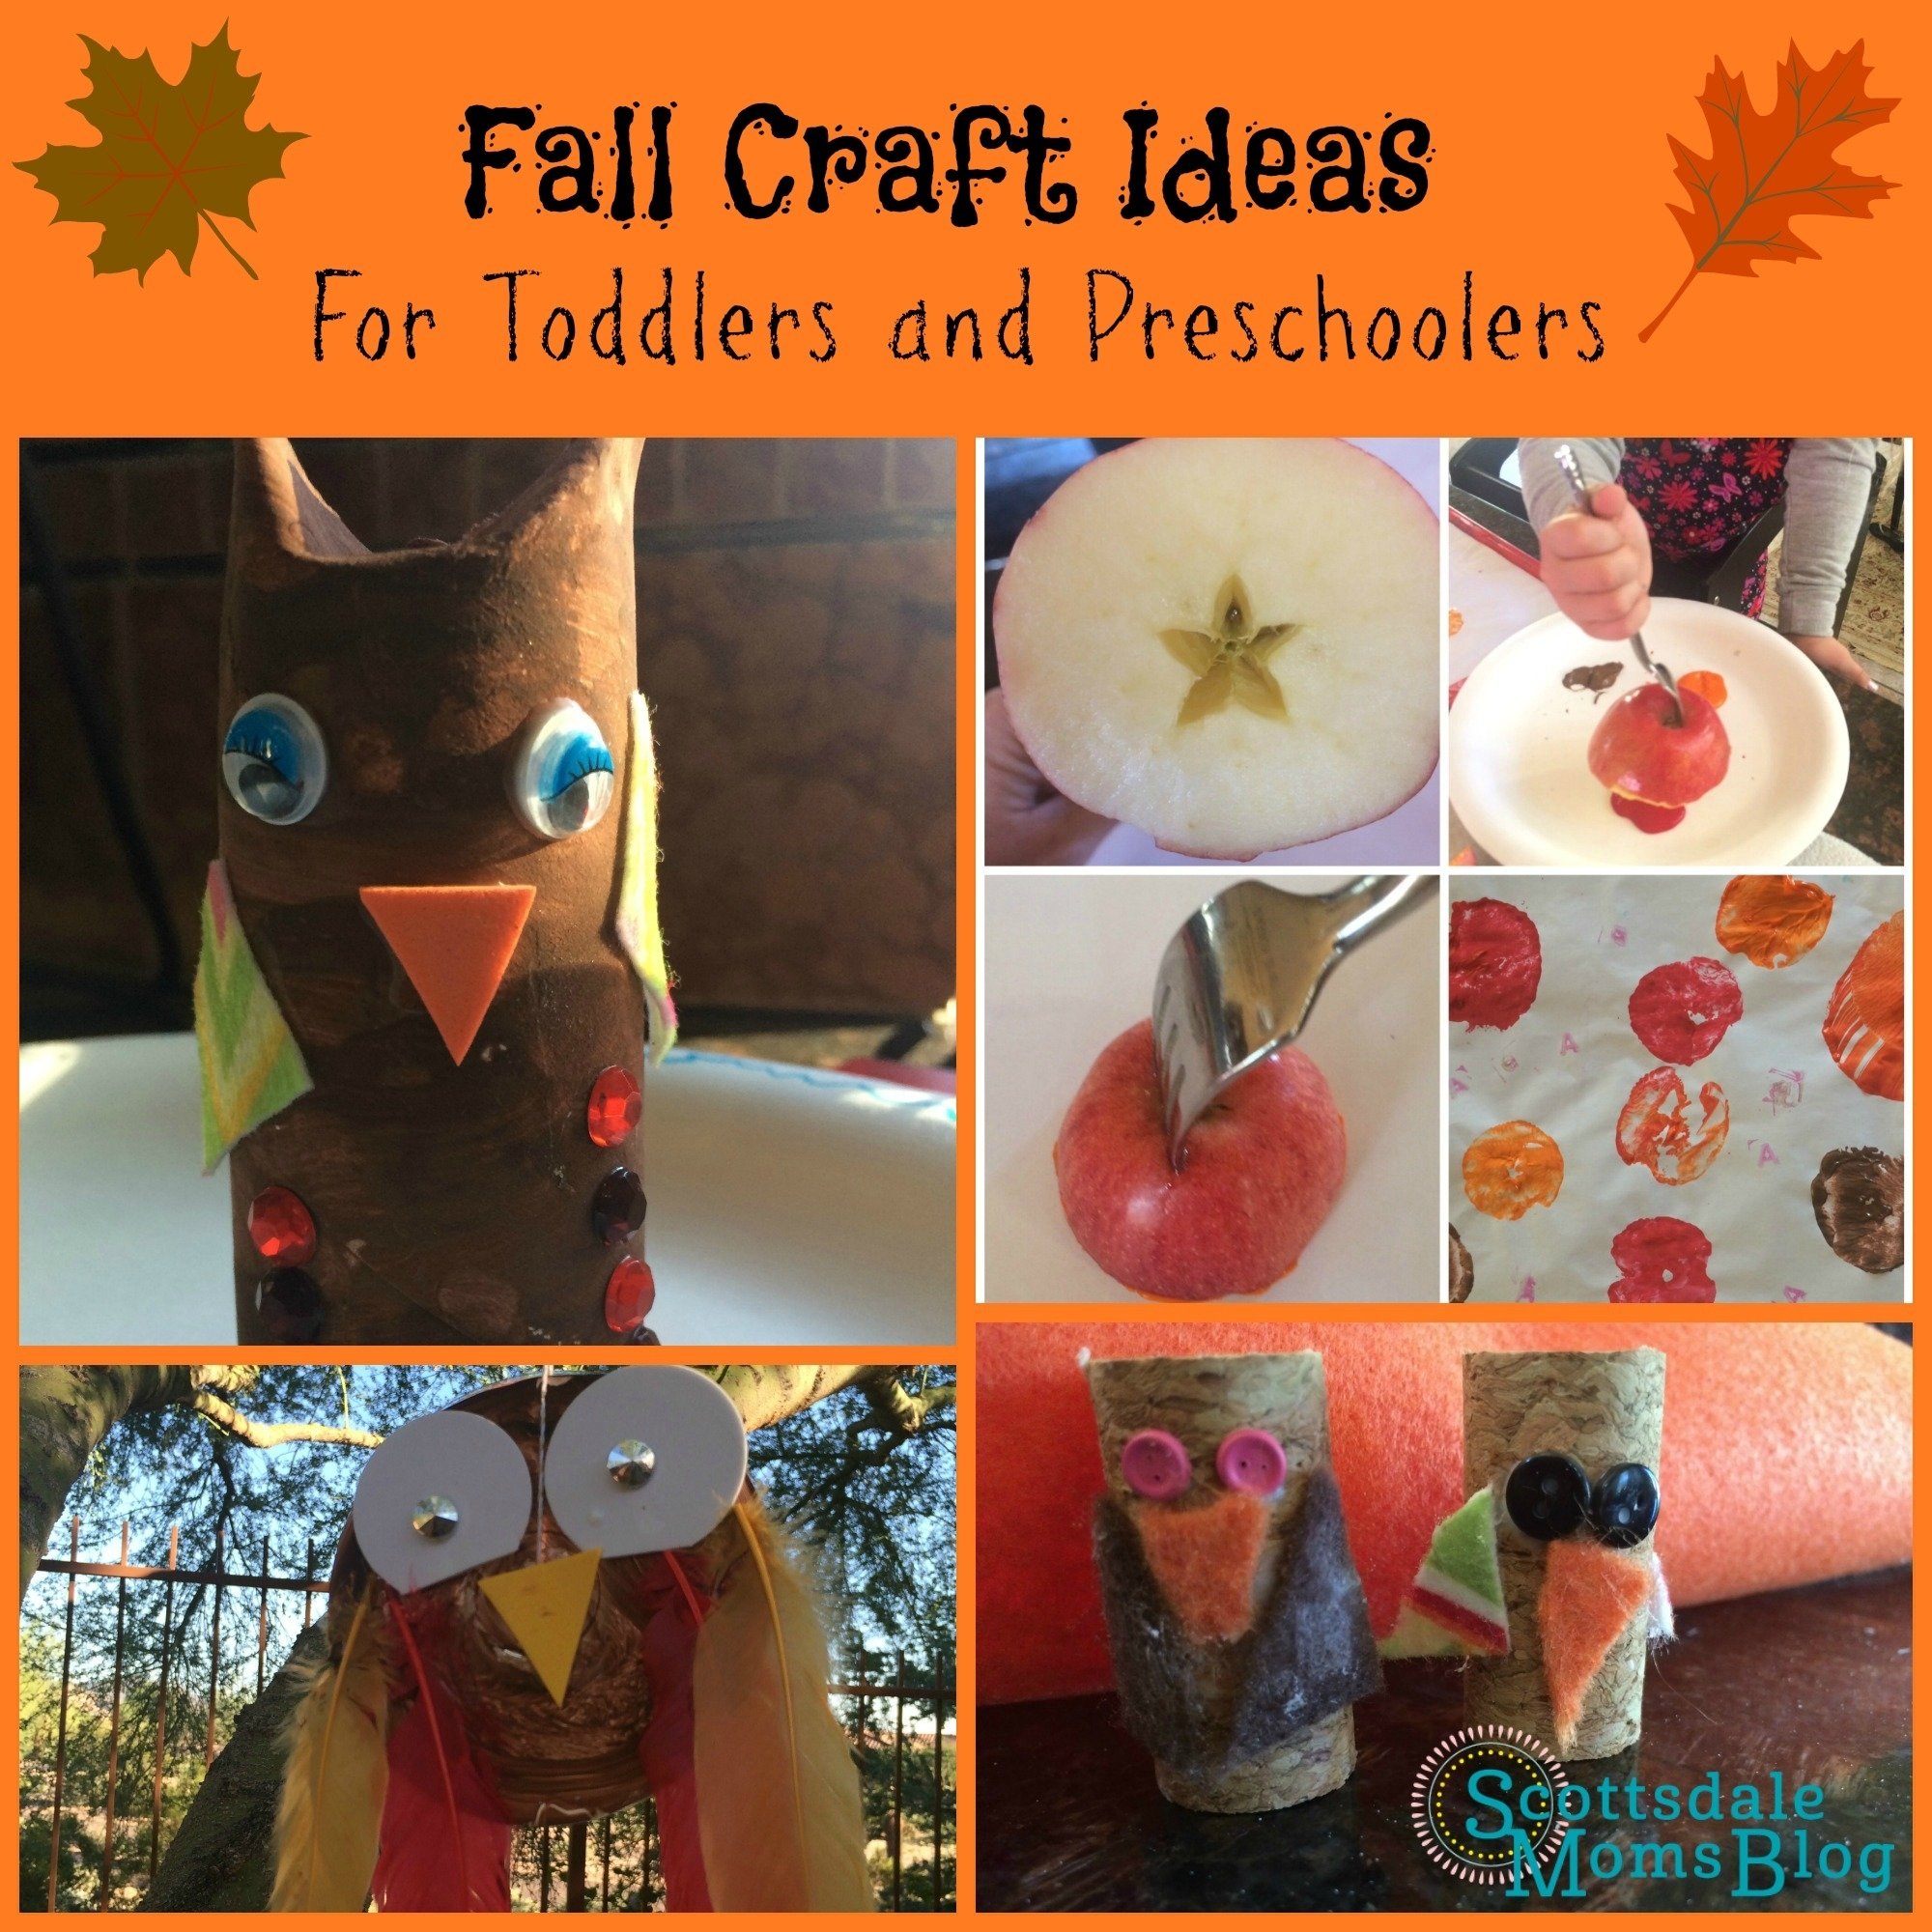 10 Awesome Fall Craft Ideas For Toddlers fall craft ideas 2022